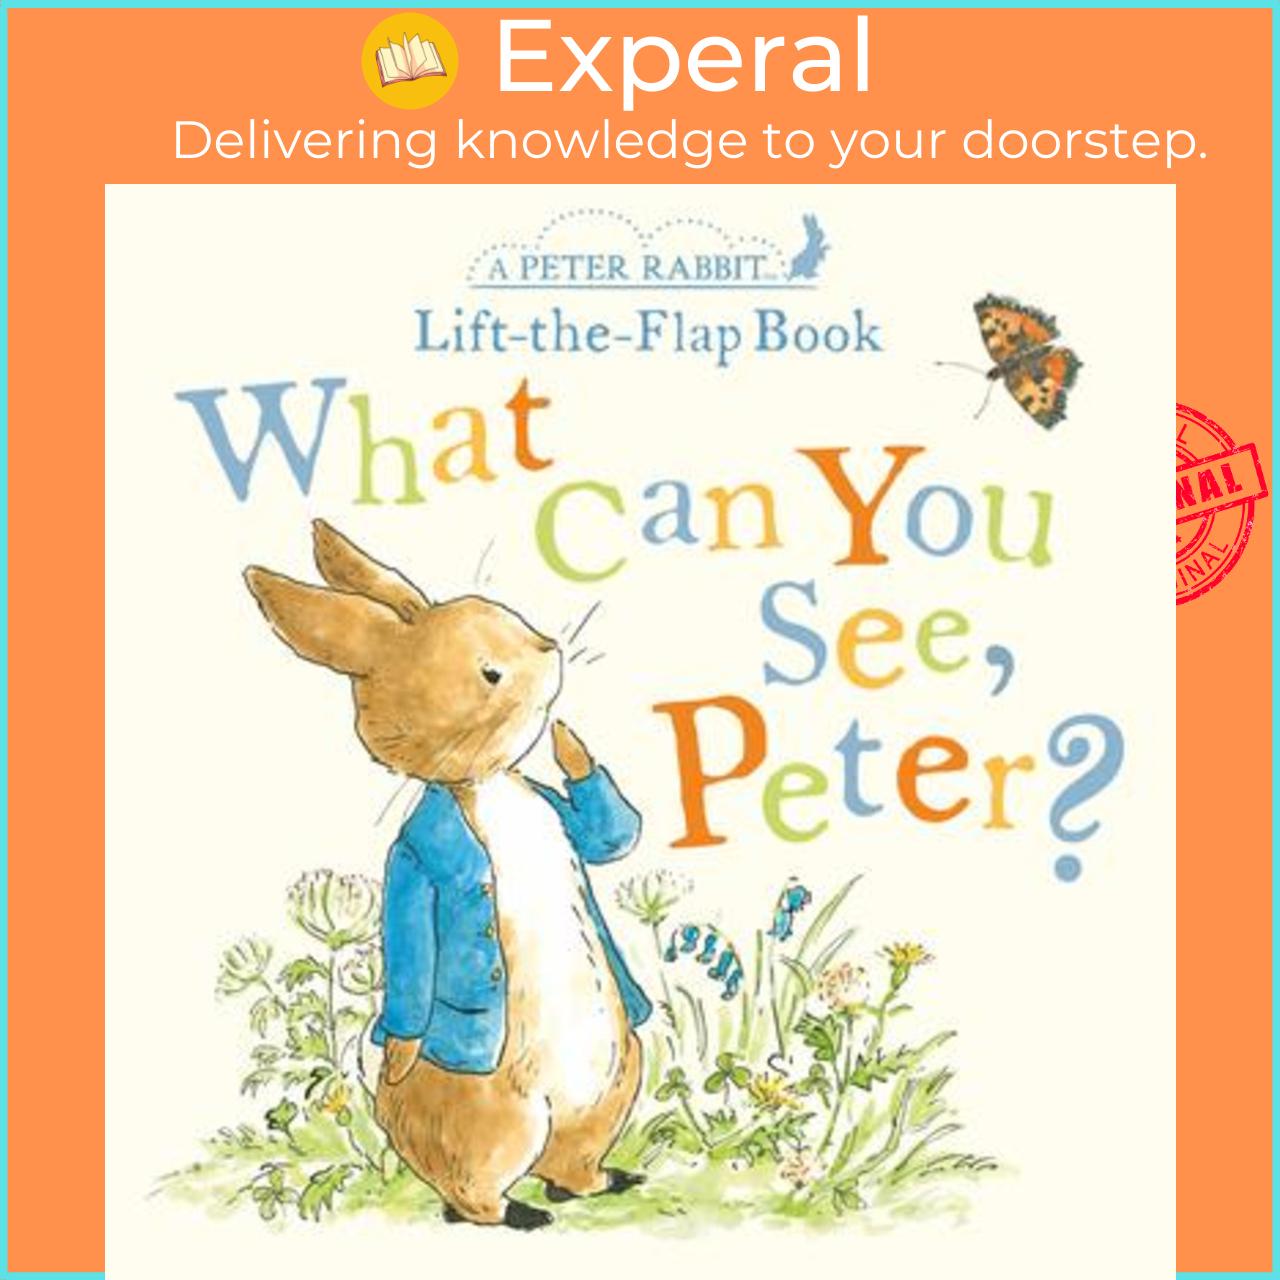 Sách - What Can You See, Peter? : A Peter Rabbit Lift-the-Flap Book by Beatrix Potter (US edition, paperback)